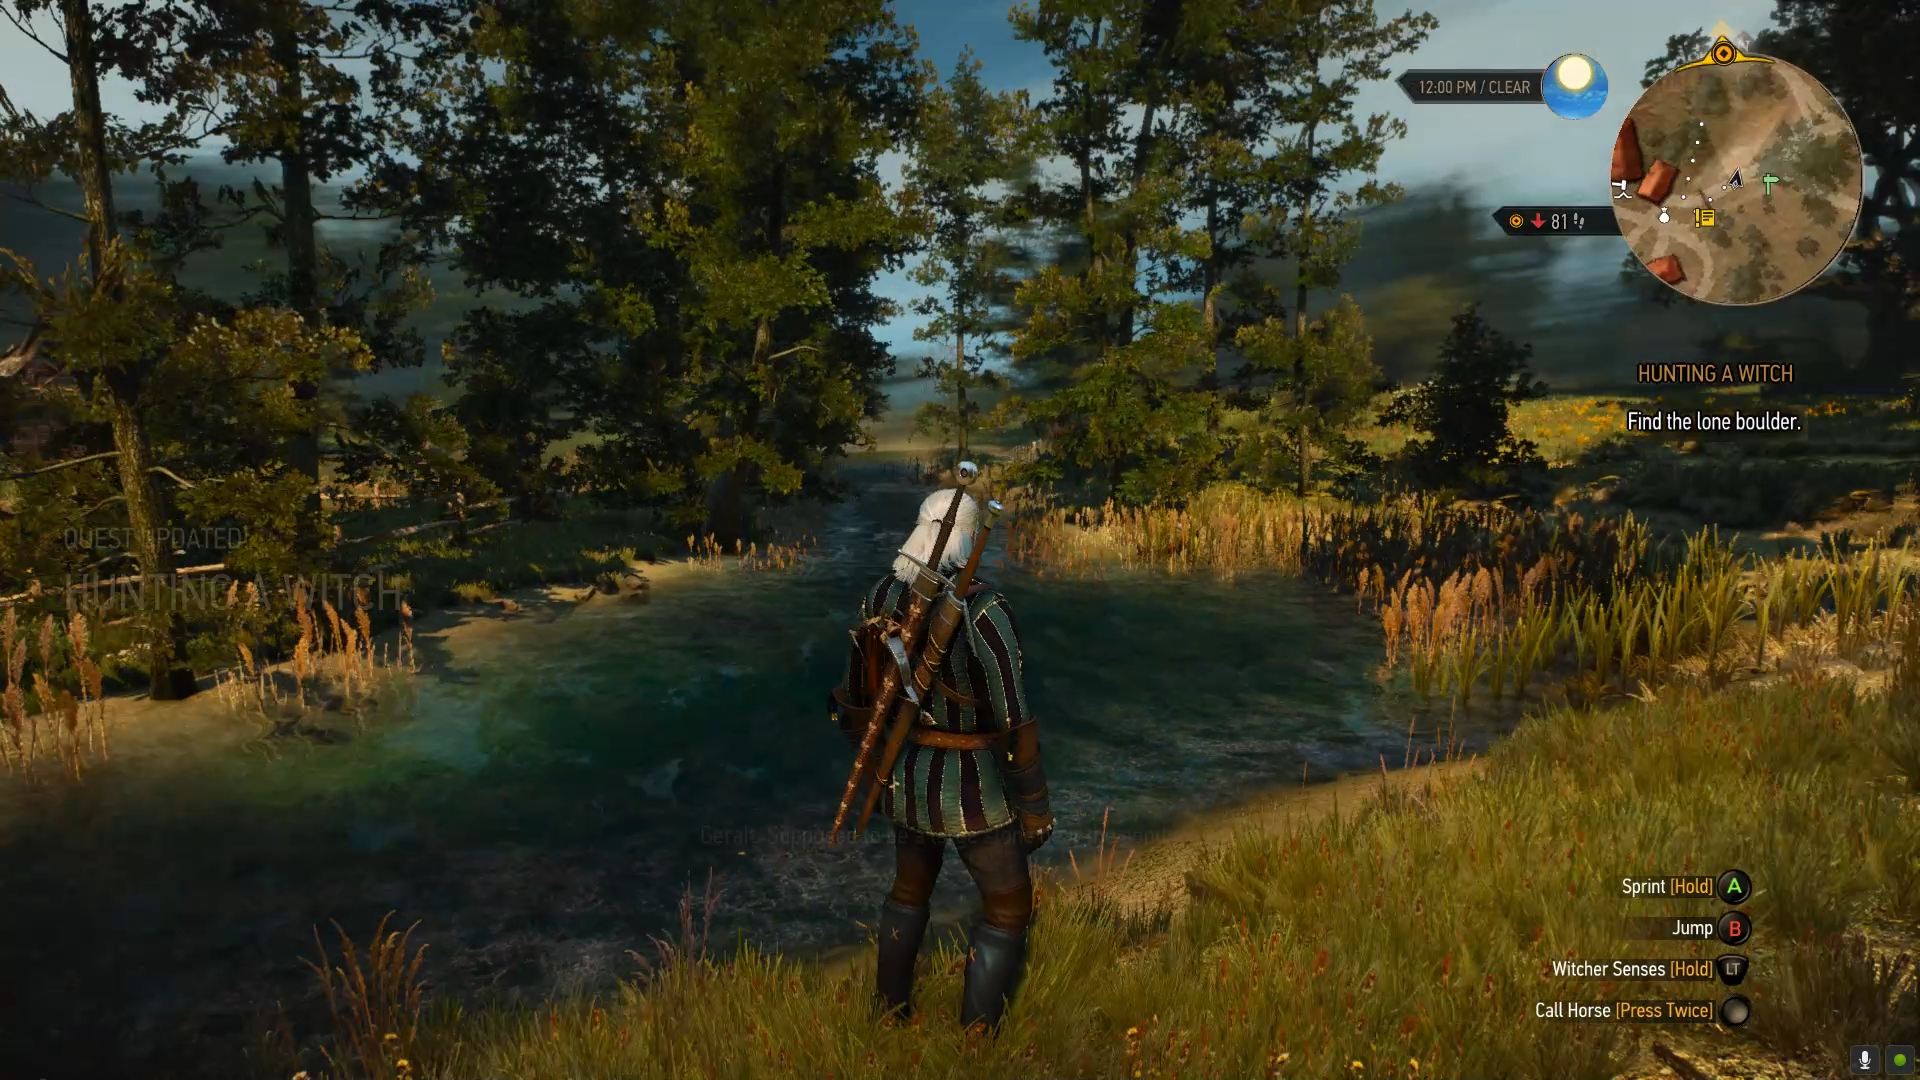 The Witcher 3 Strategy：Hunting a Witch (Main Quest) – Velen